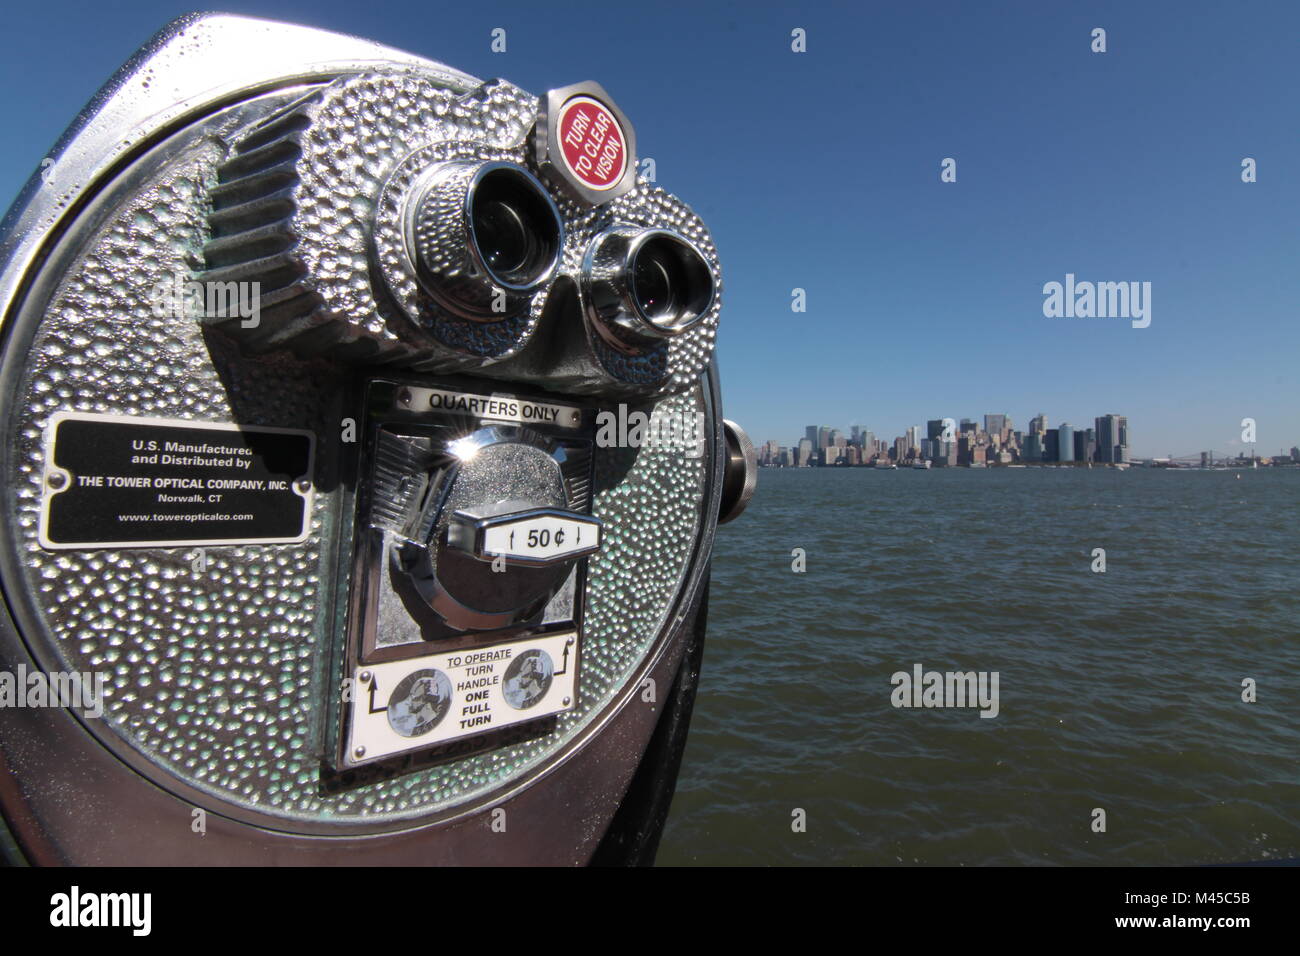 A very nice binocular at the Ellis Island, New York, USA to help people see things around the island and see New York from city from a distance. Stock Photo